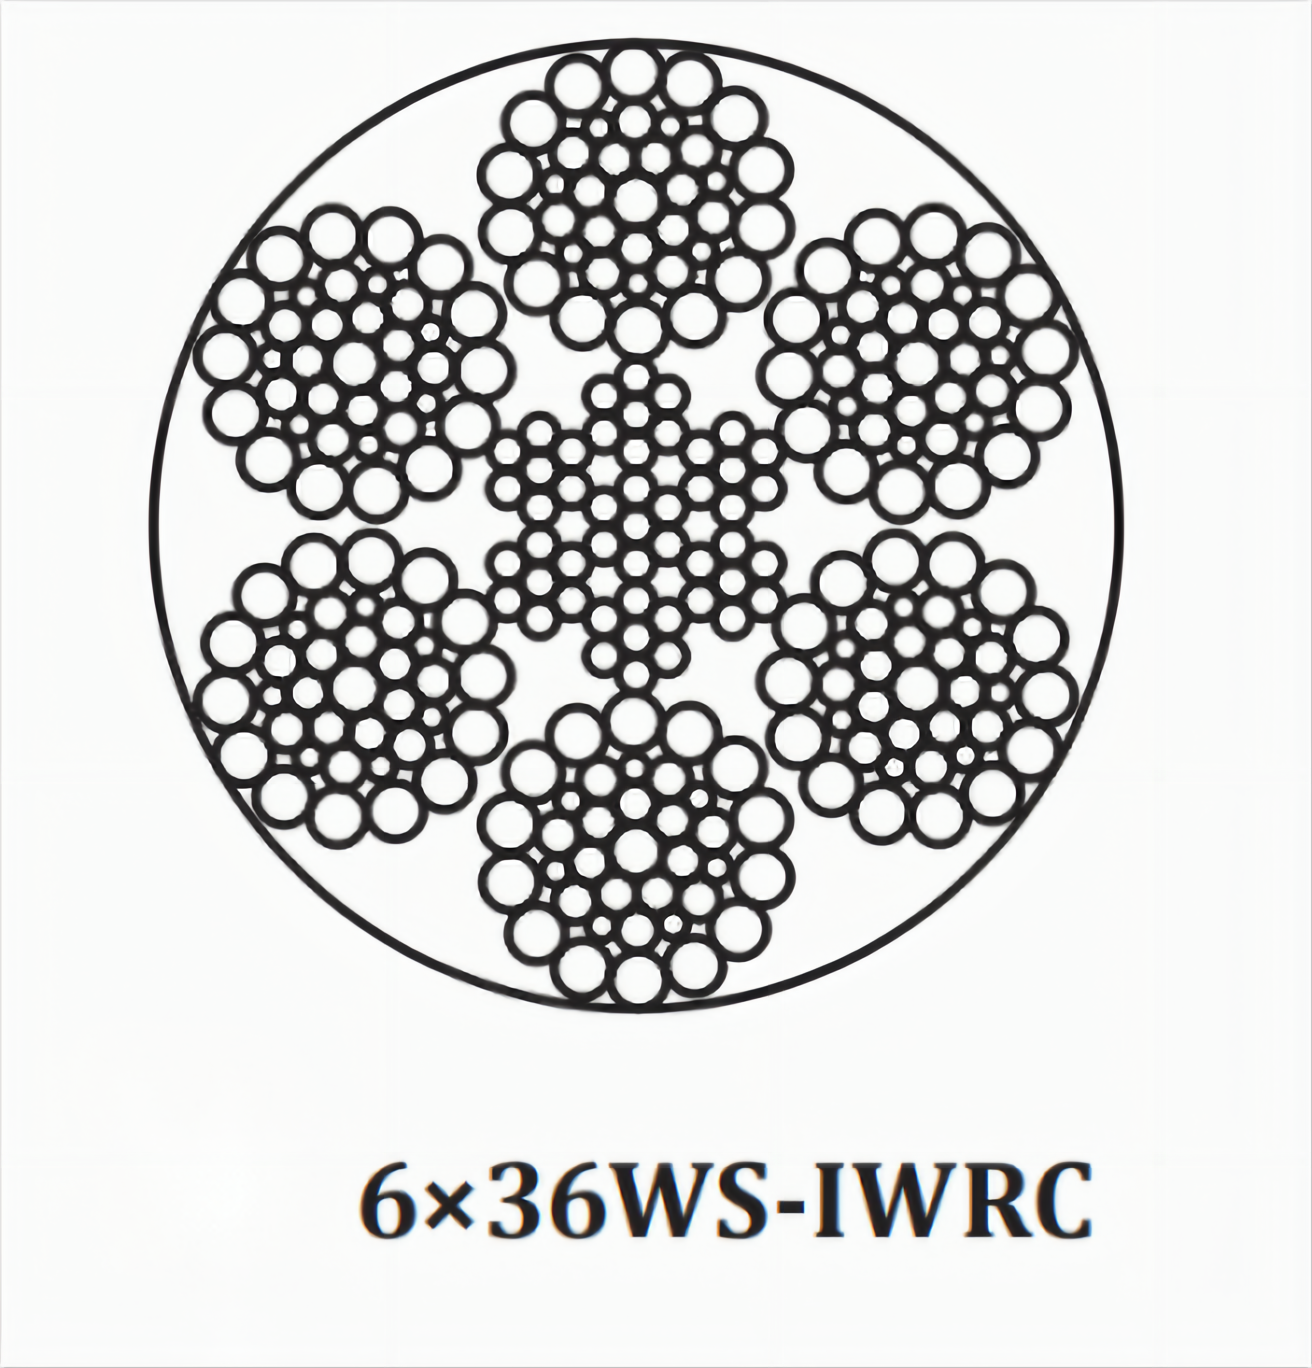 WS parallel stainless wire rope